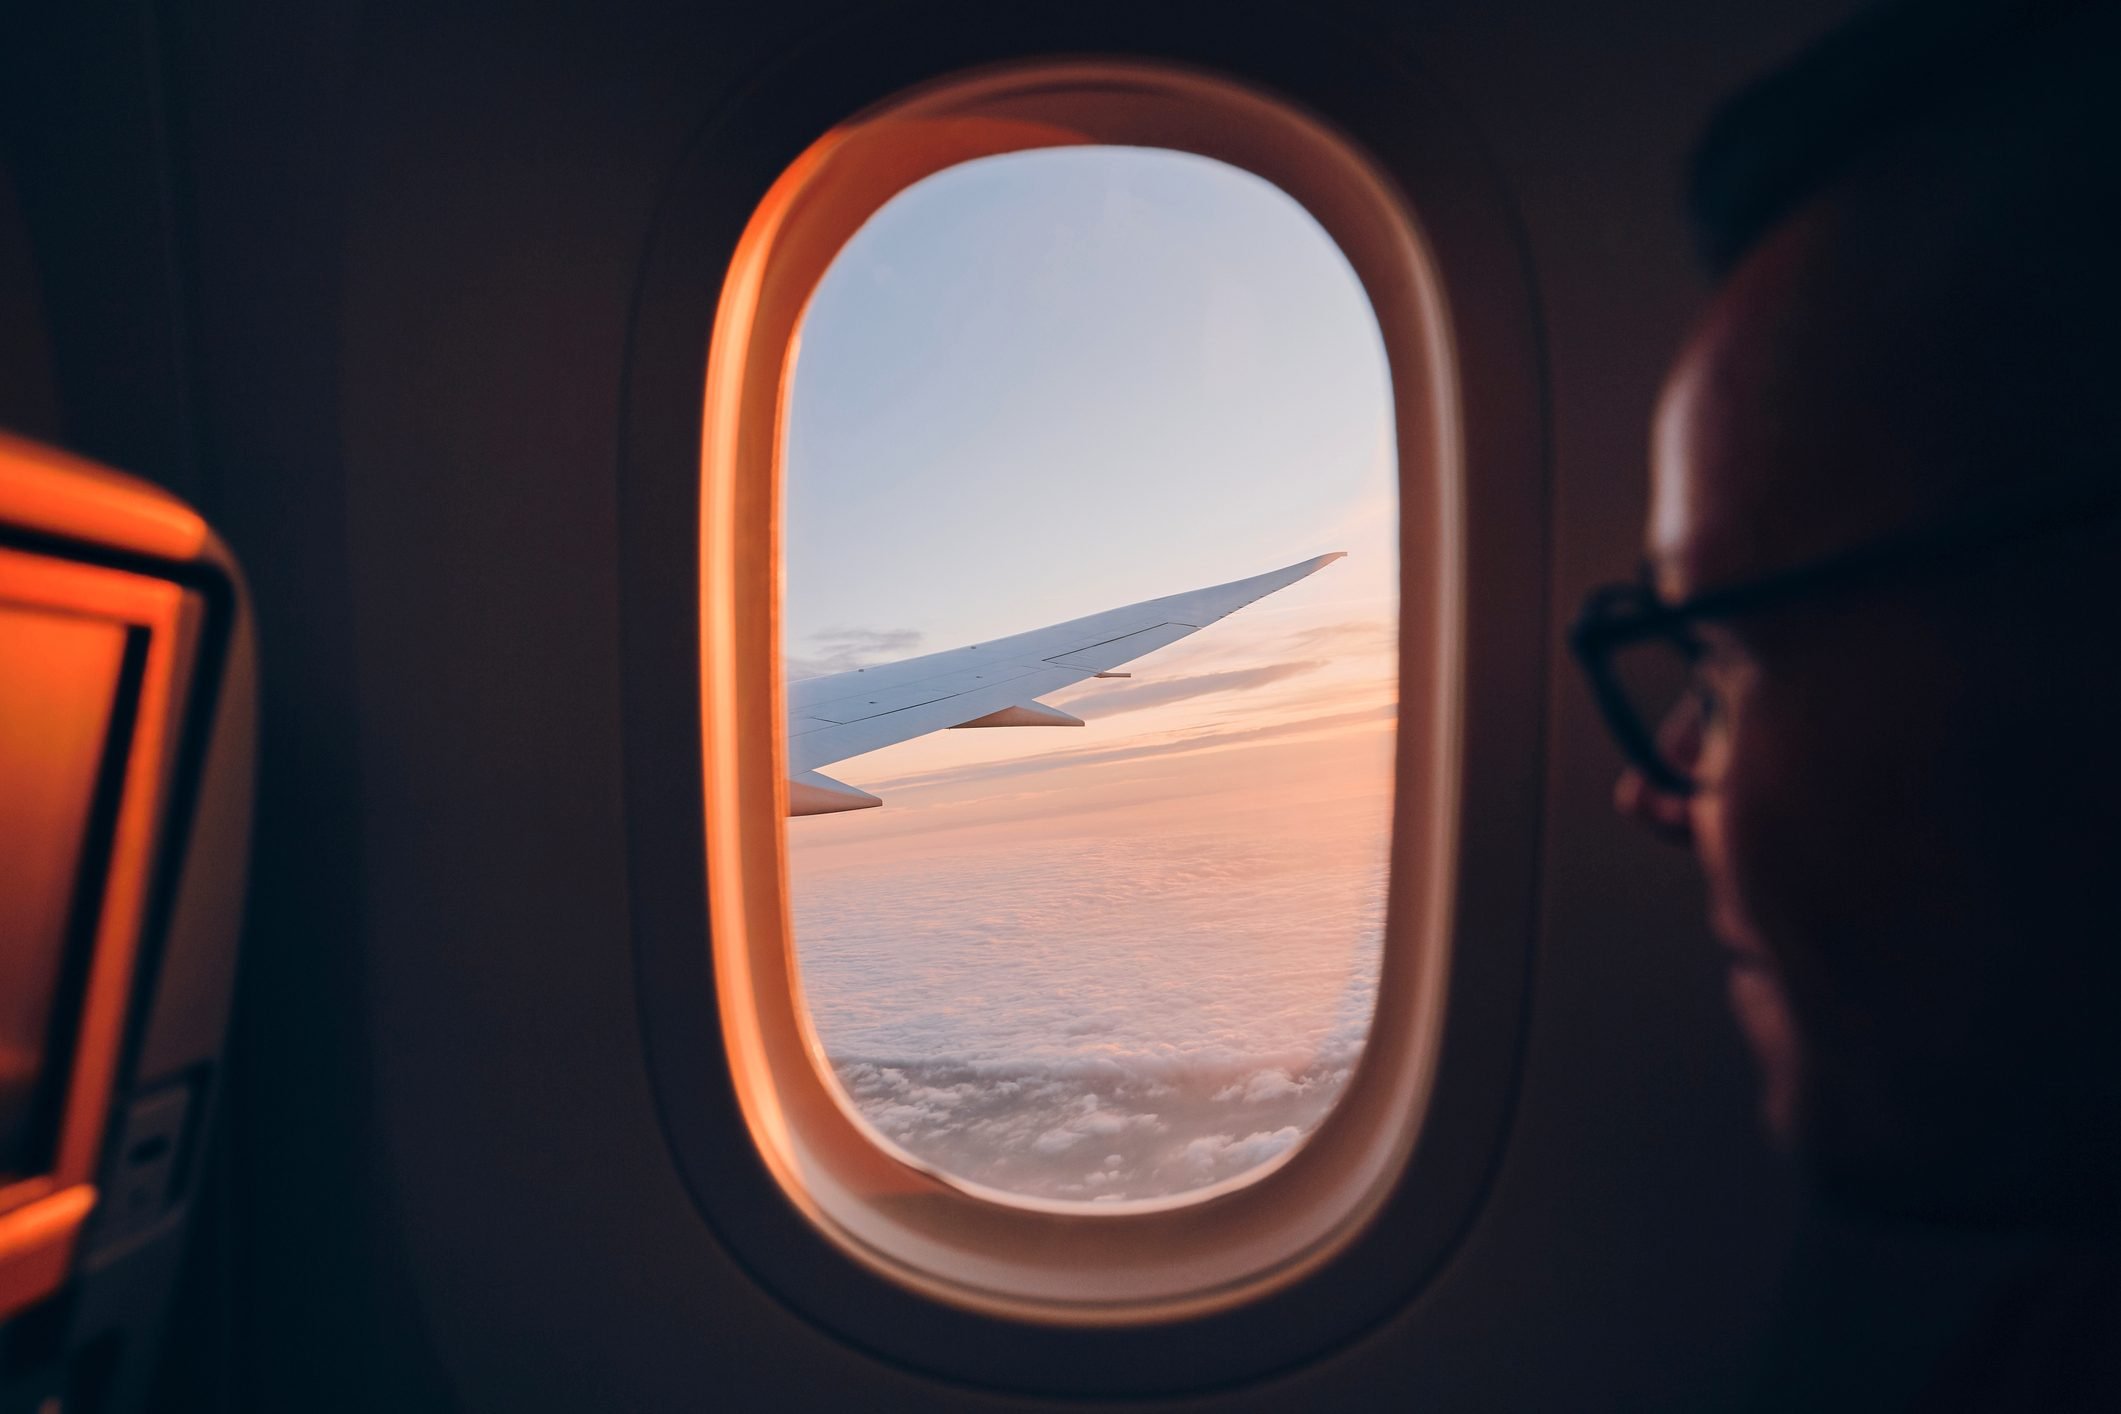 Ever Wonder Why Airplane Windows Are Round? Here's the Answer